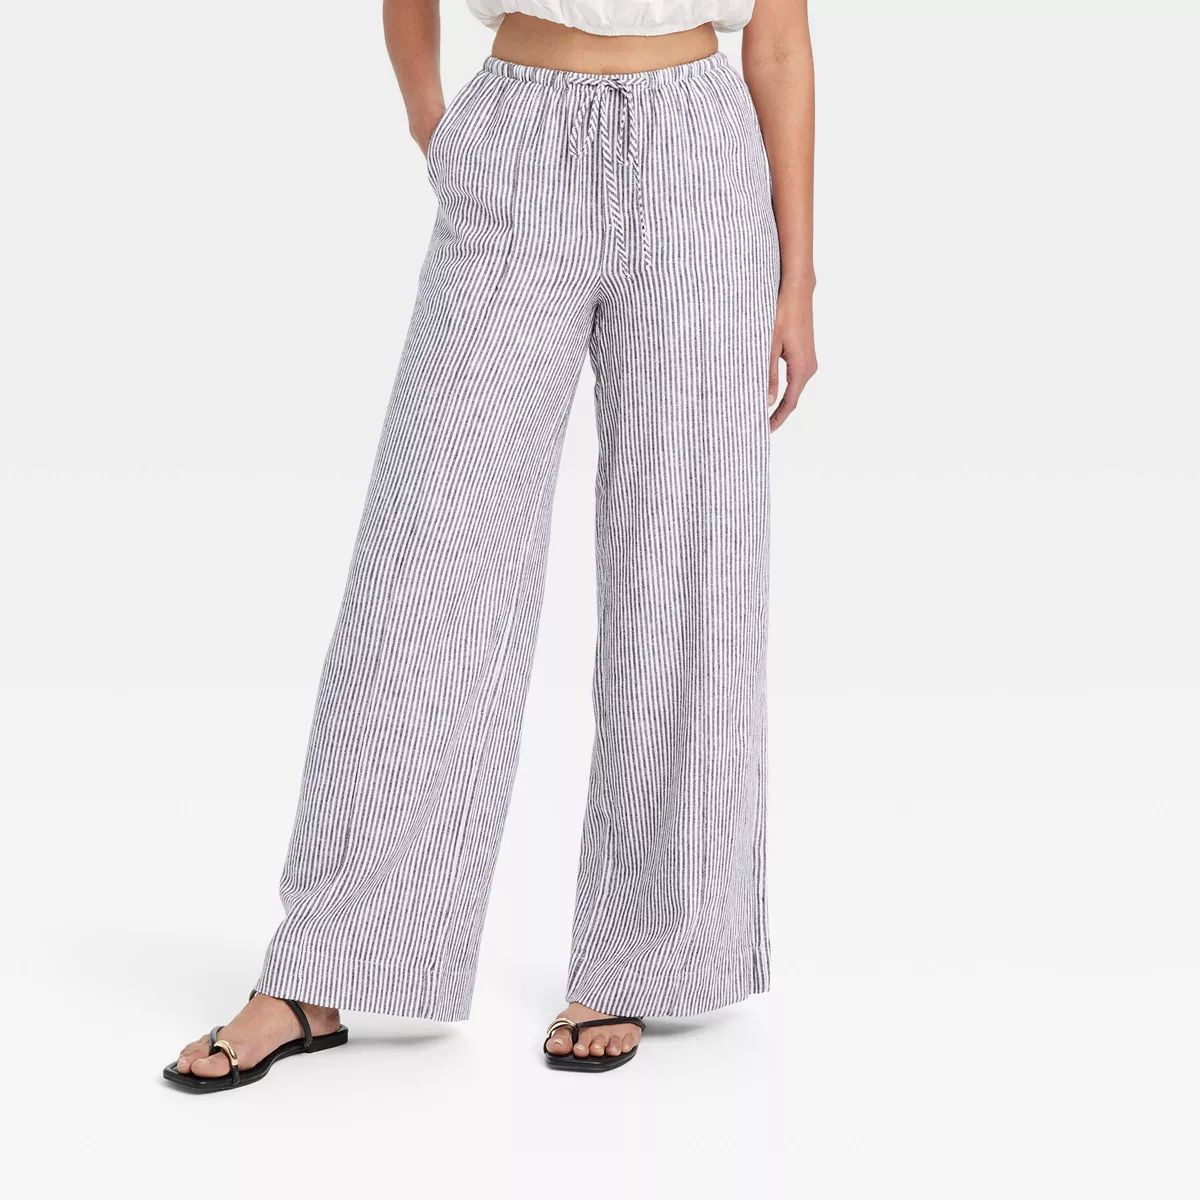 Women's High-Rise Wide Leg Linen Pull-On Pants - A New Day™ Black/White Striped L | Target